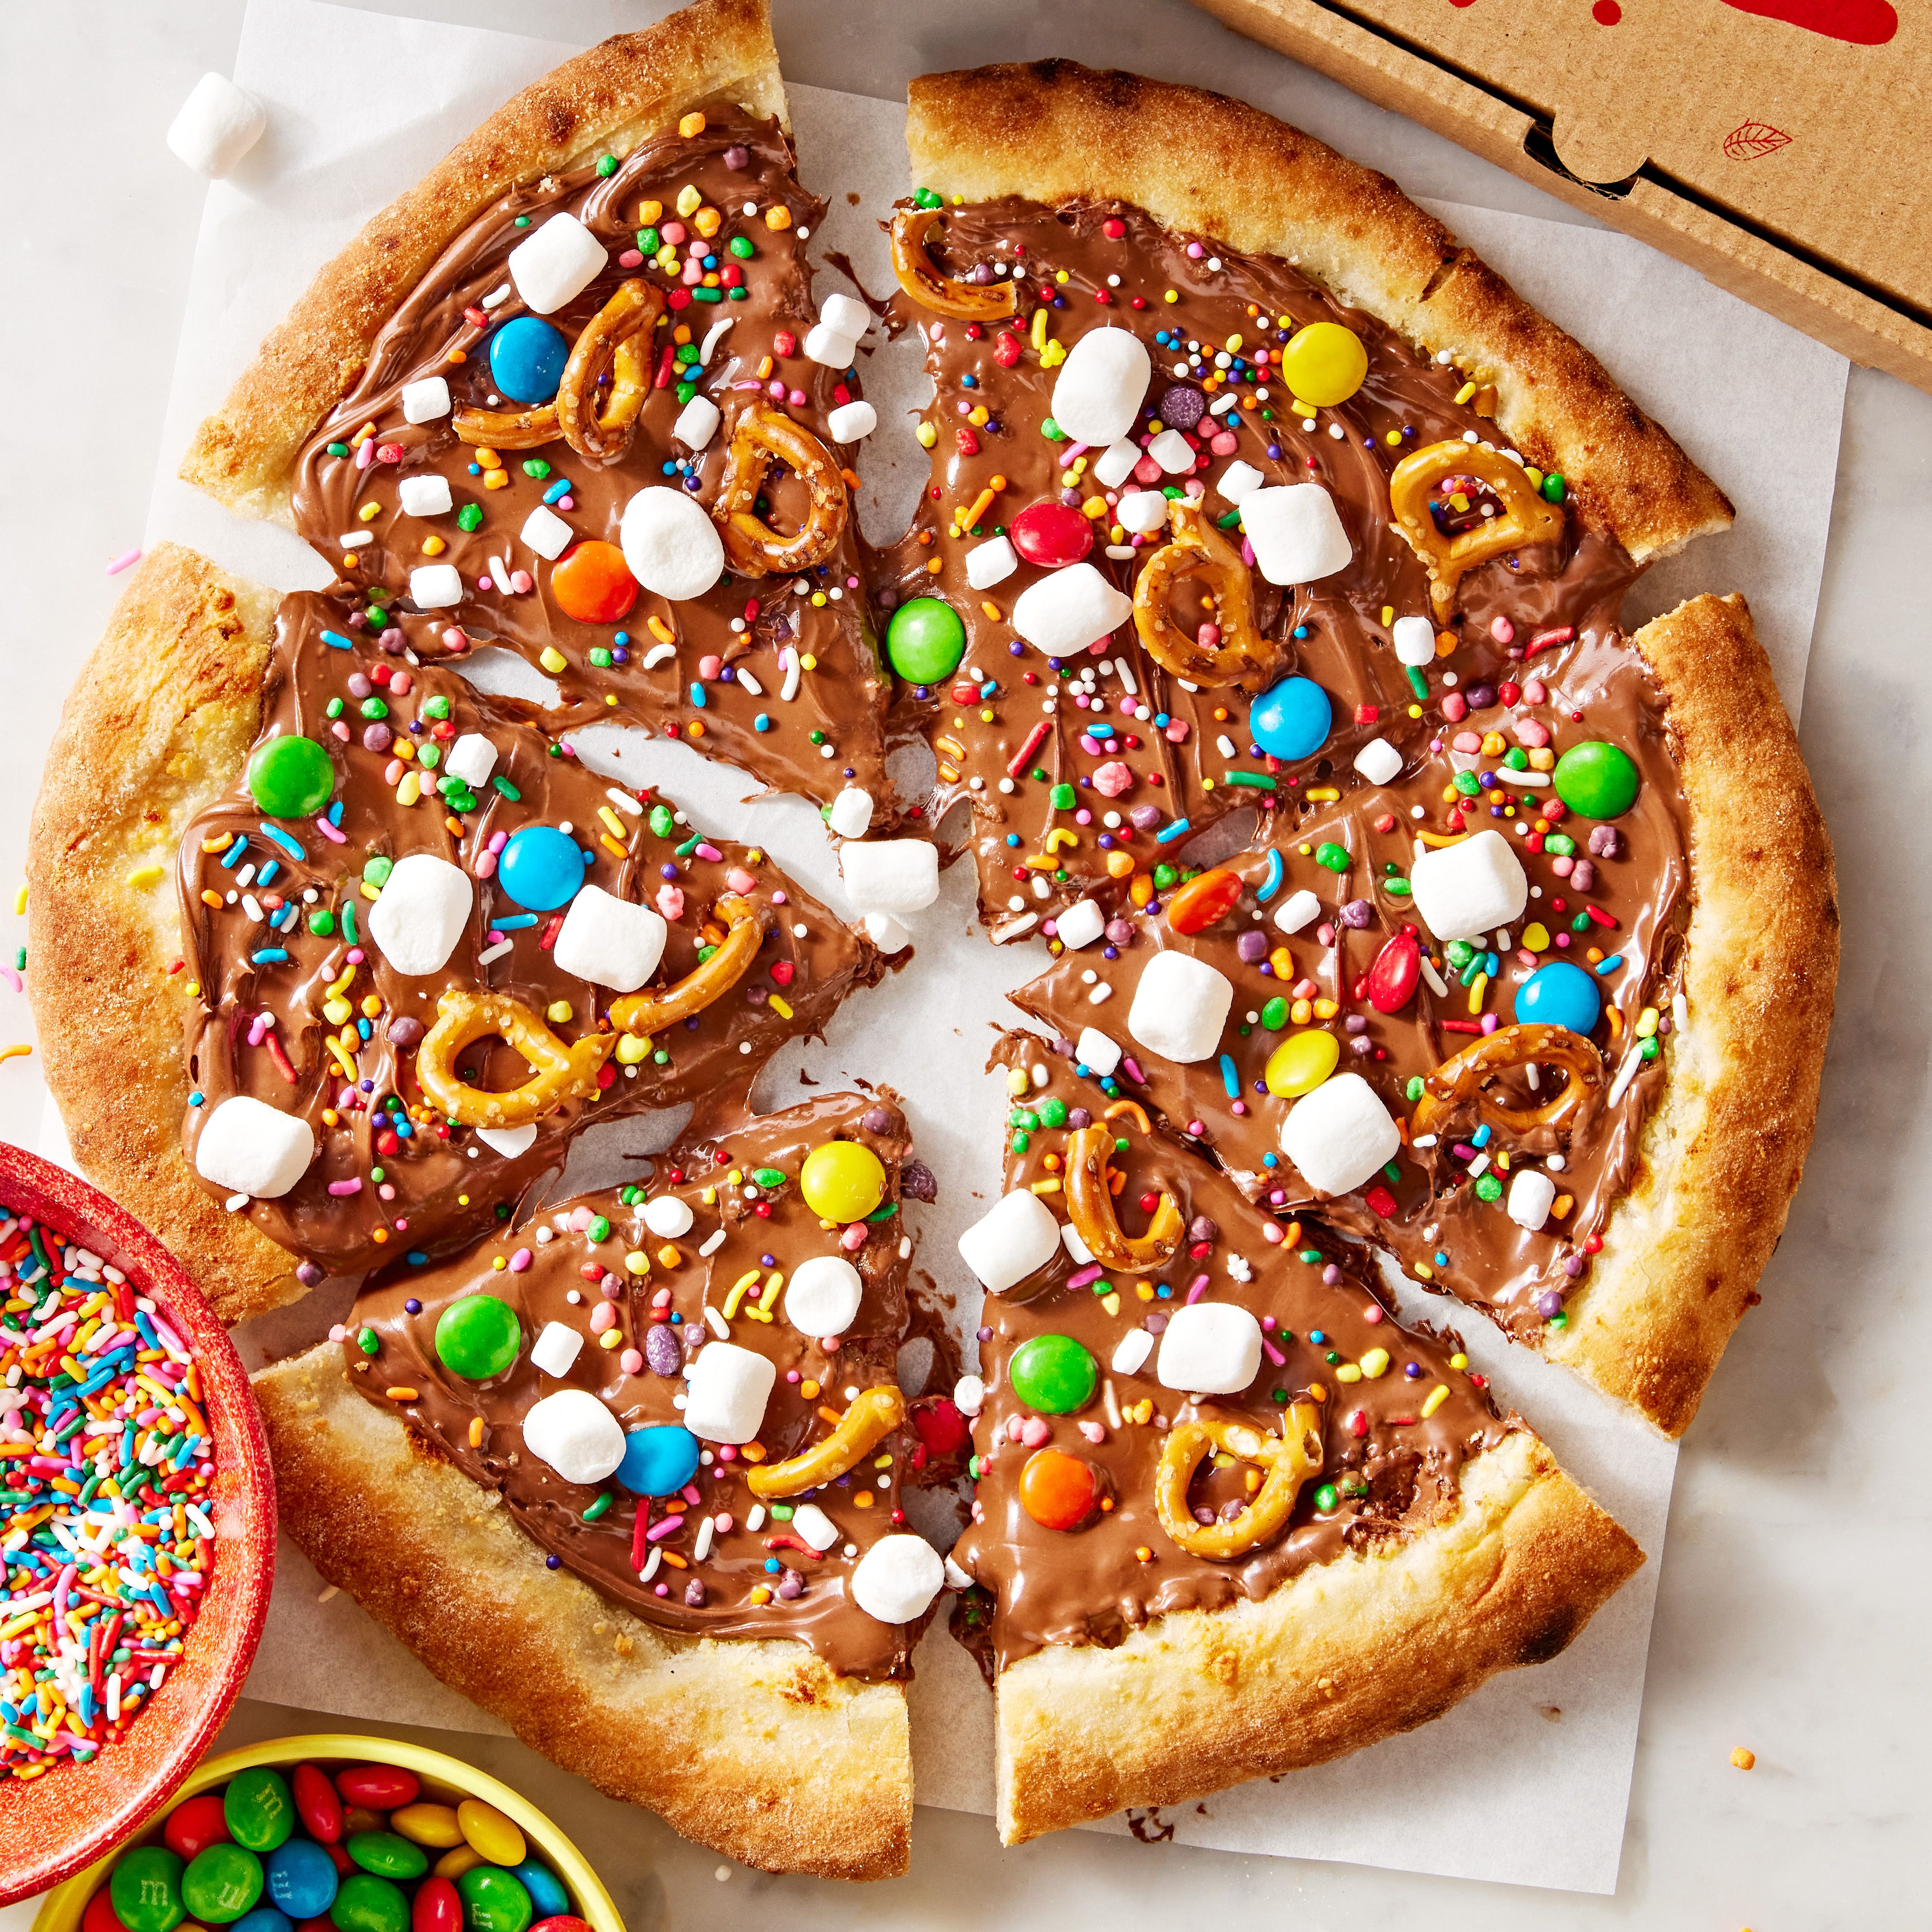 Our Top 10 Favorite Treats - Chocolate Pizza Company